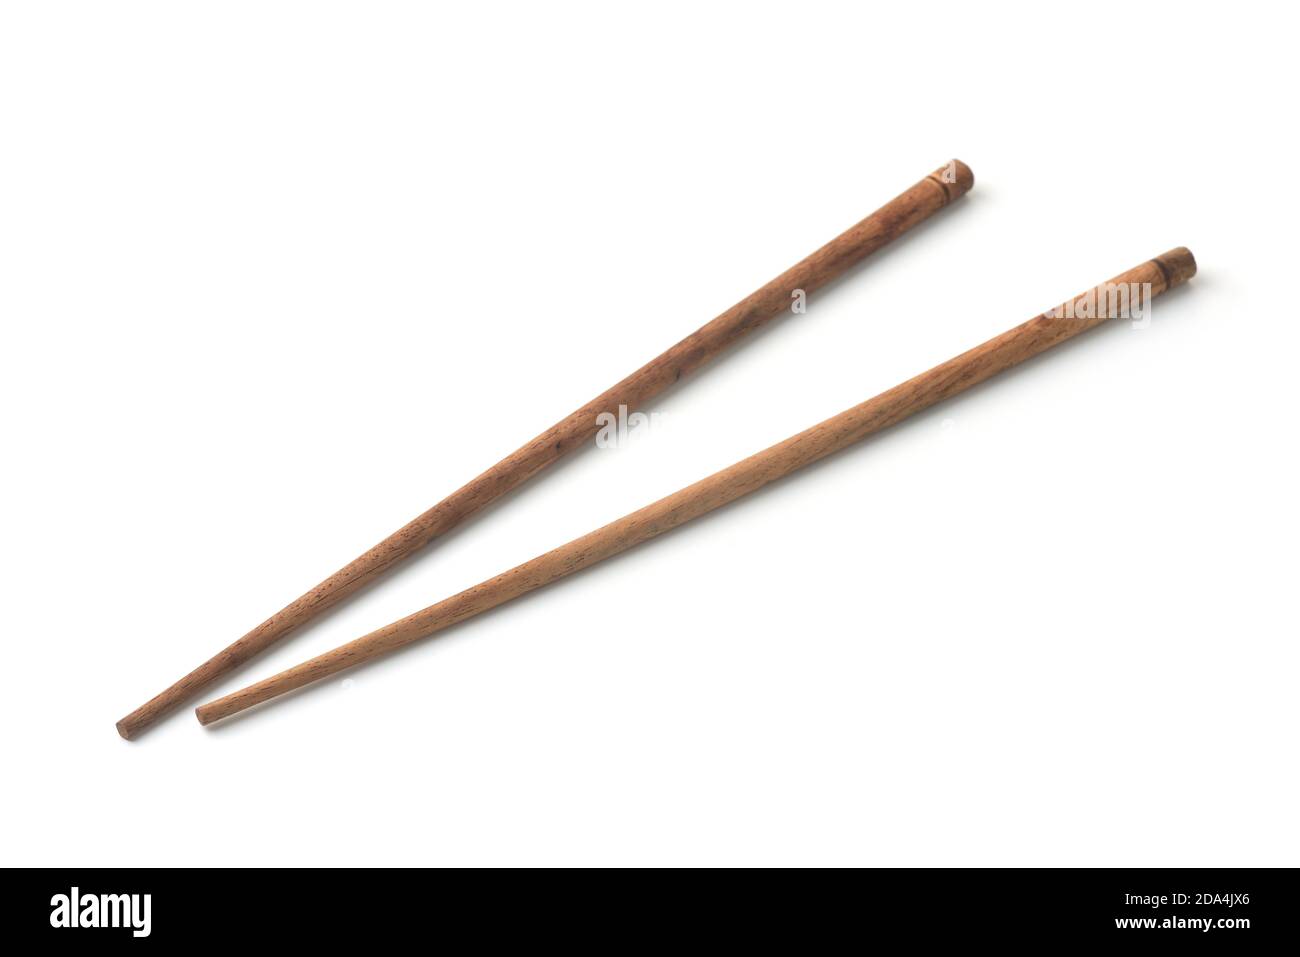 Pair of wooden chopsticks isolated on white Stock Photo